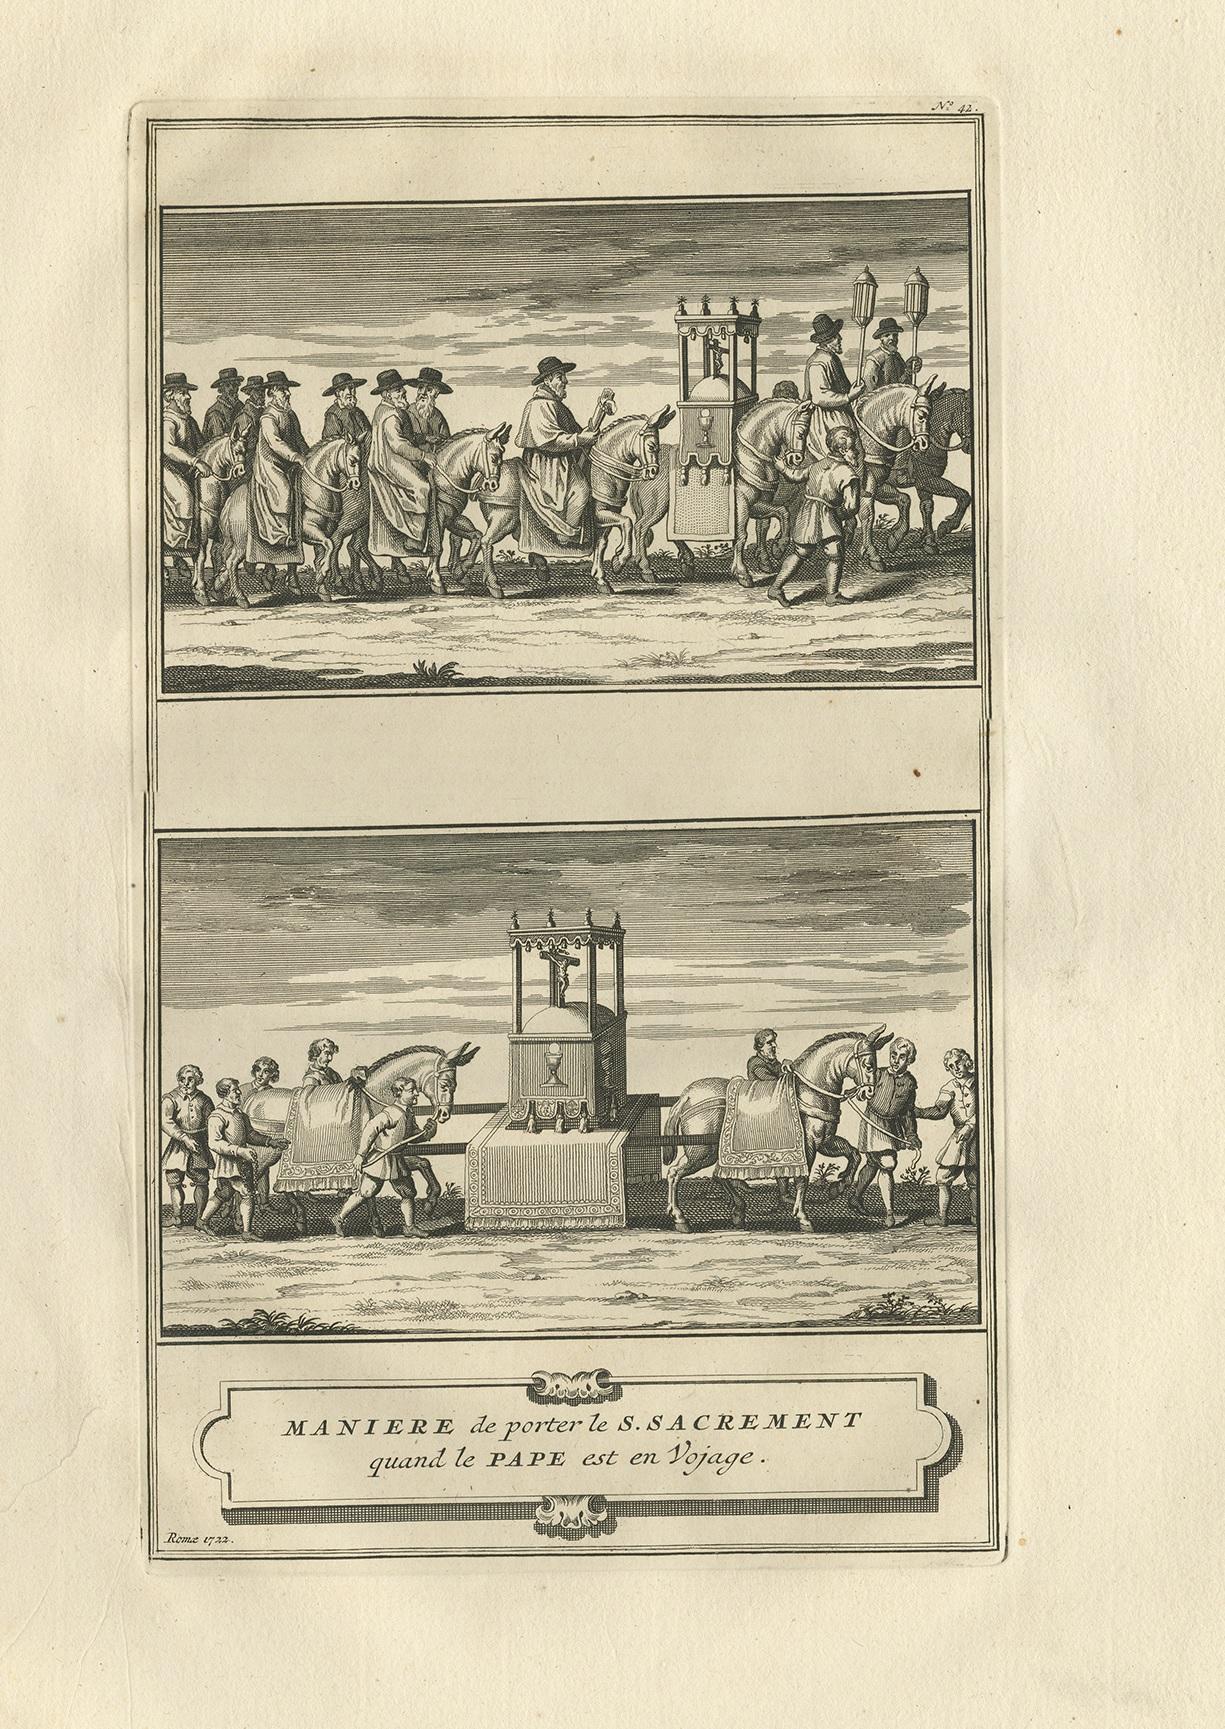 Antique religion print titled 'Maniere de porter le S. Sacrement quand le Pape est en Vojage'. This print depicts how the Holy Sacrament is carried when the Pope is travelling. This print originates from 'Ceremonies et costumes Religieuses (..)' by